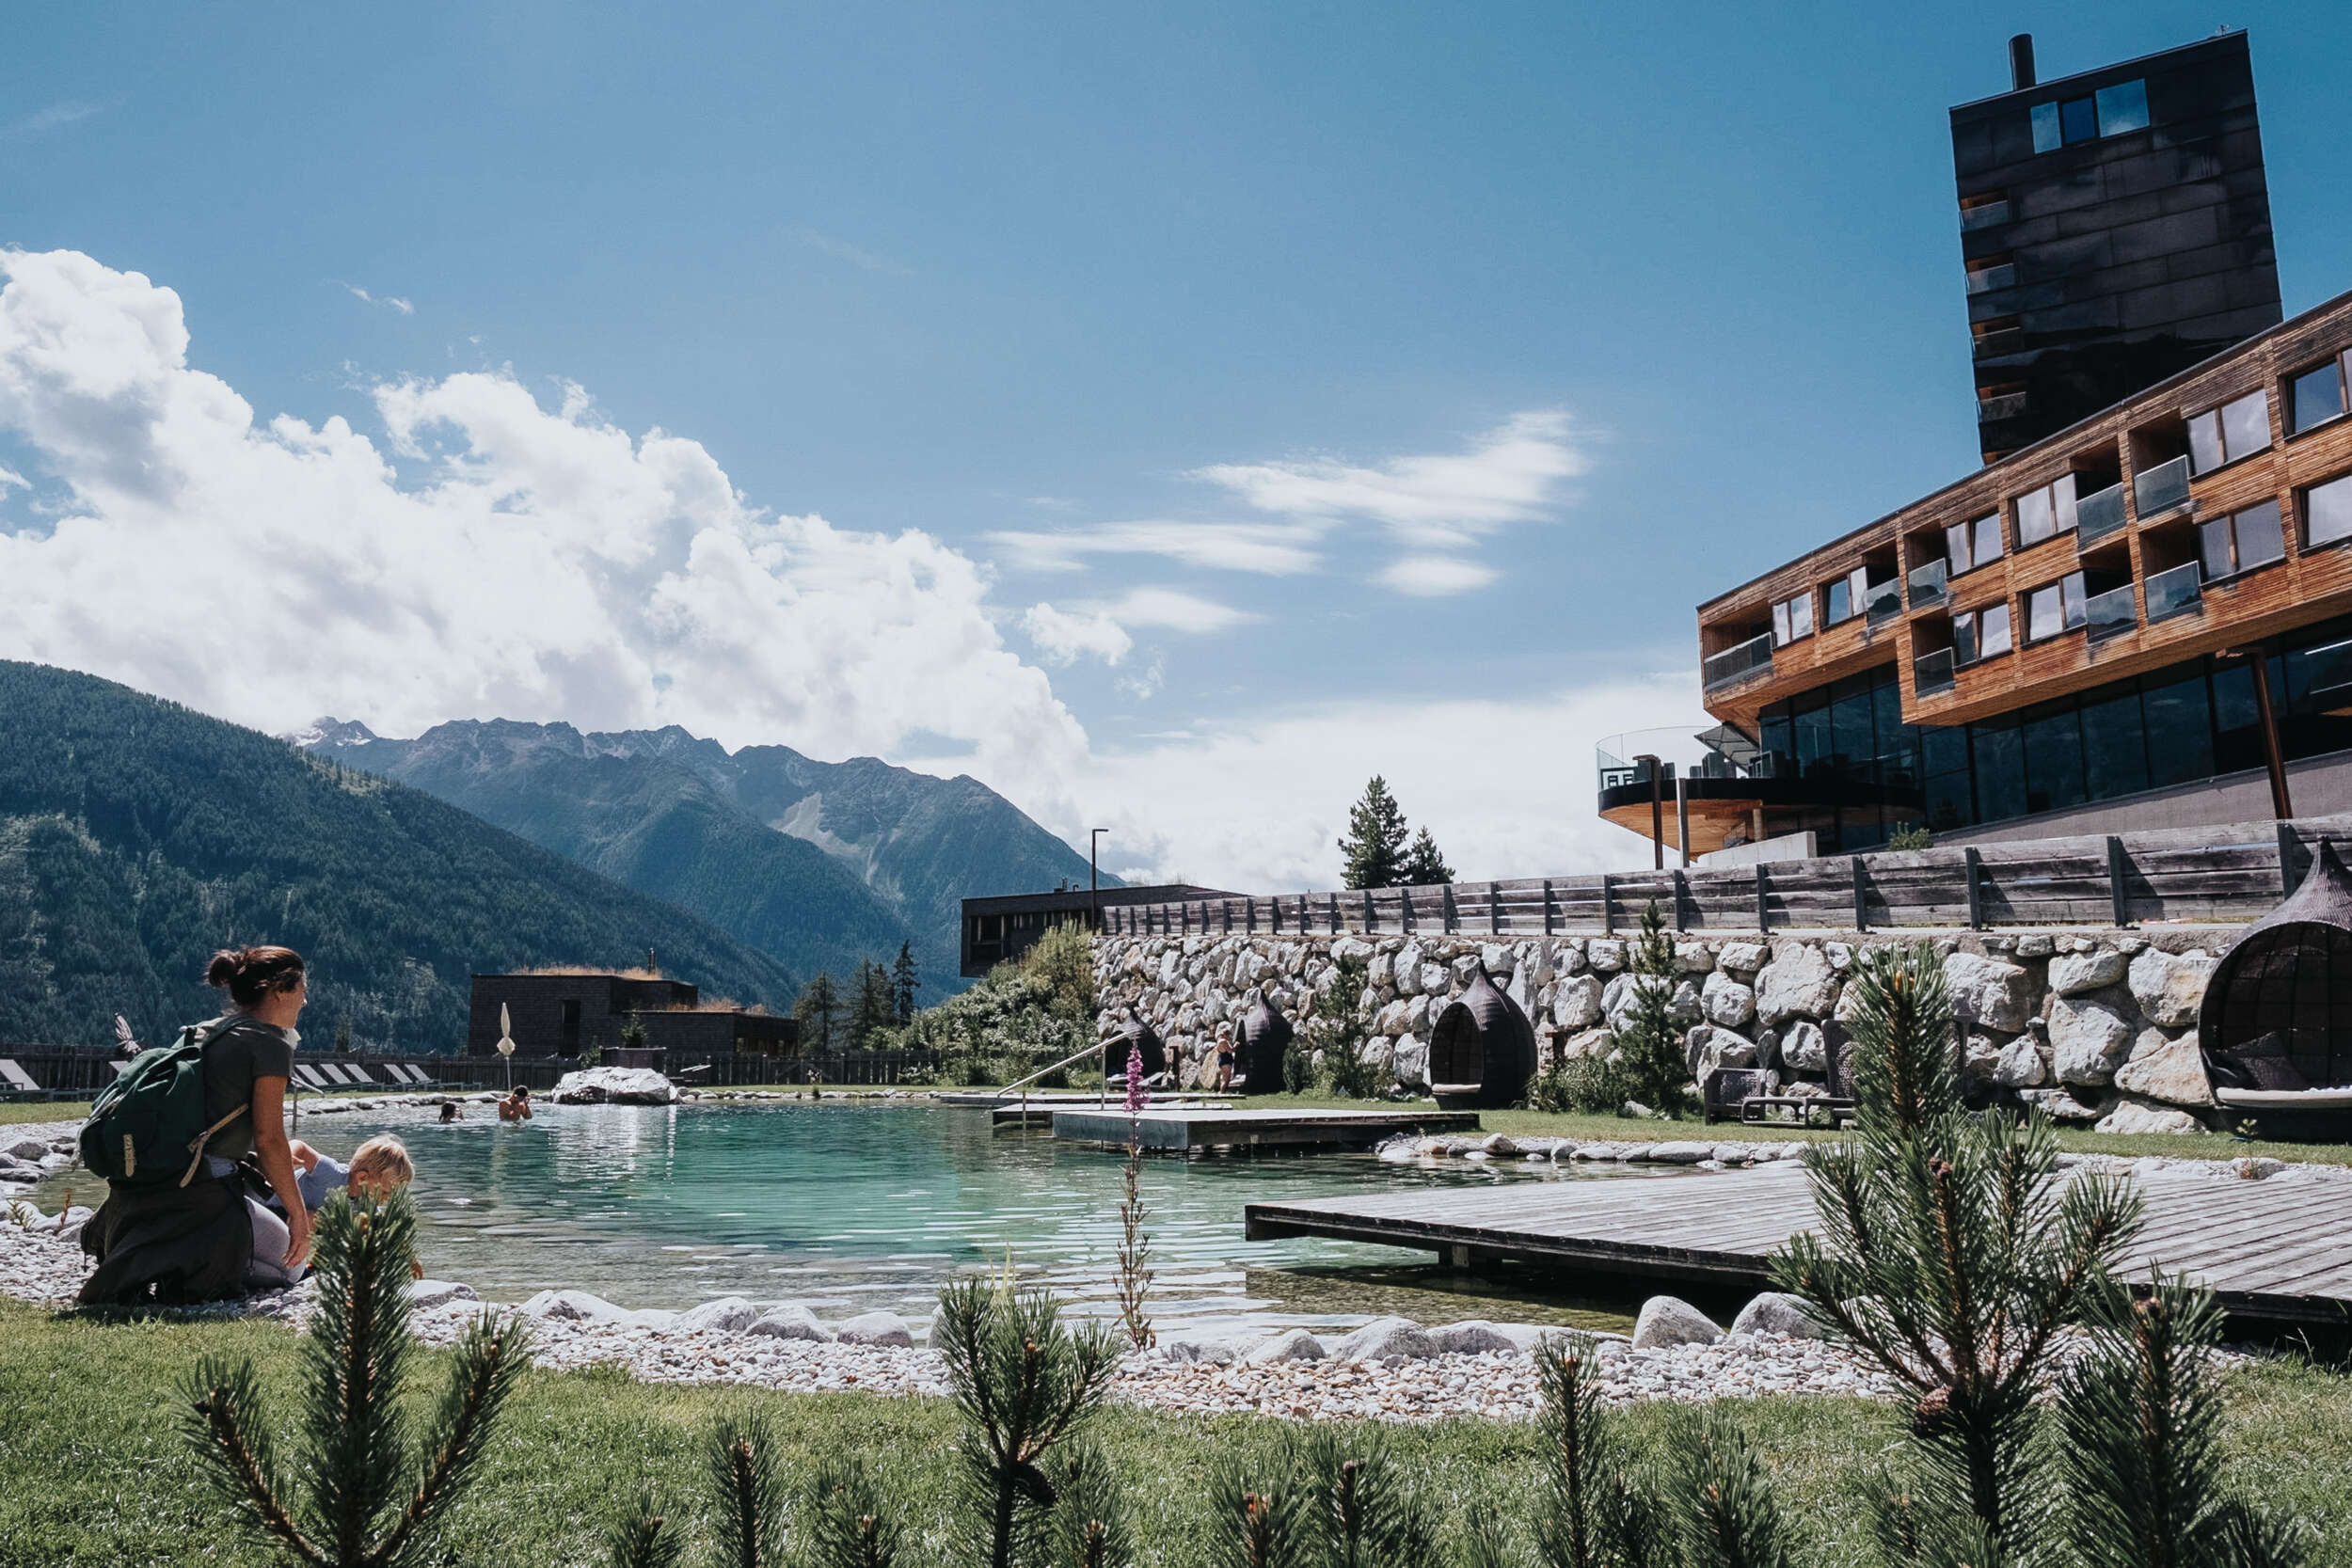 The Austrian Mountain Resort - review from a family